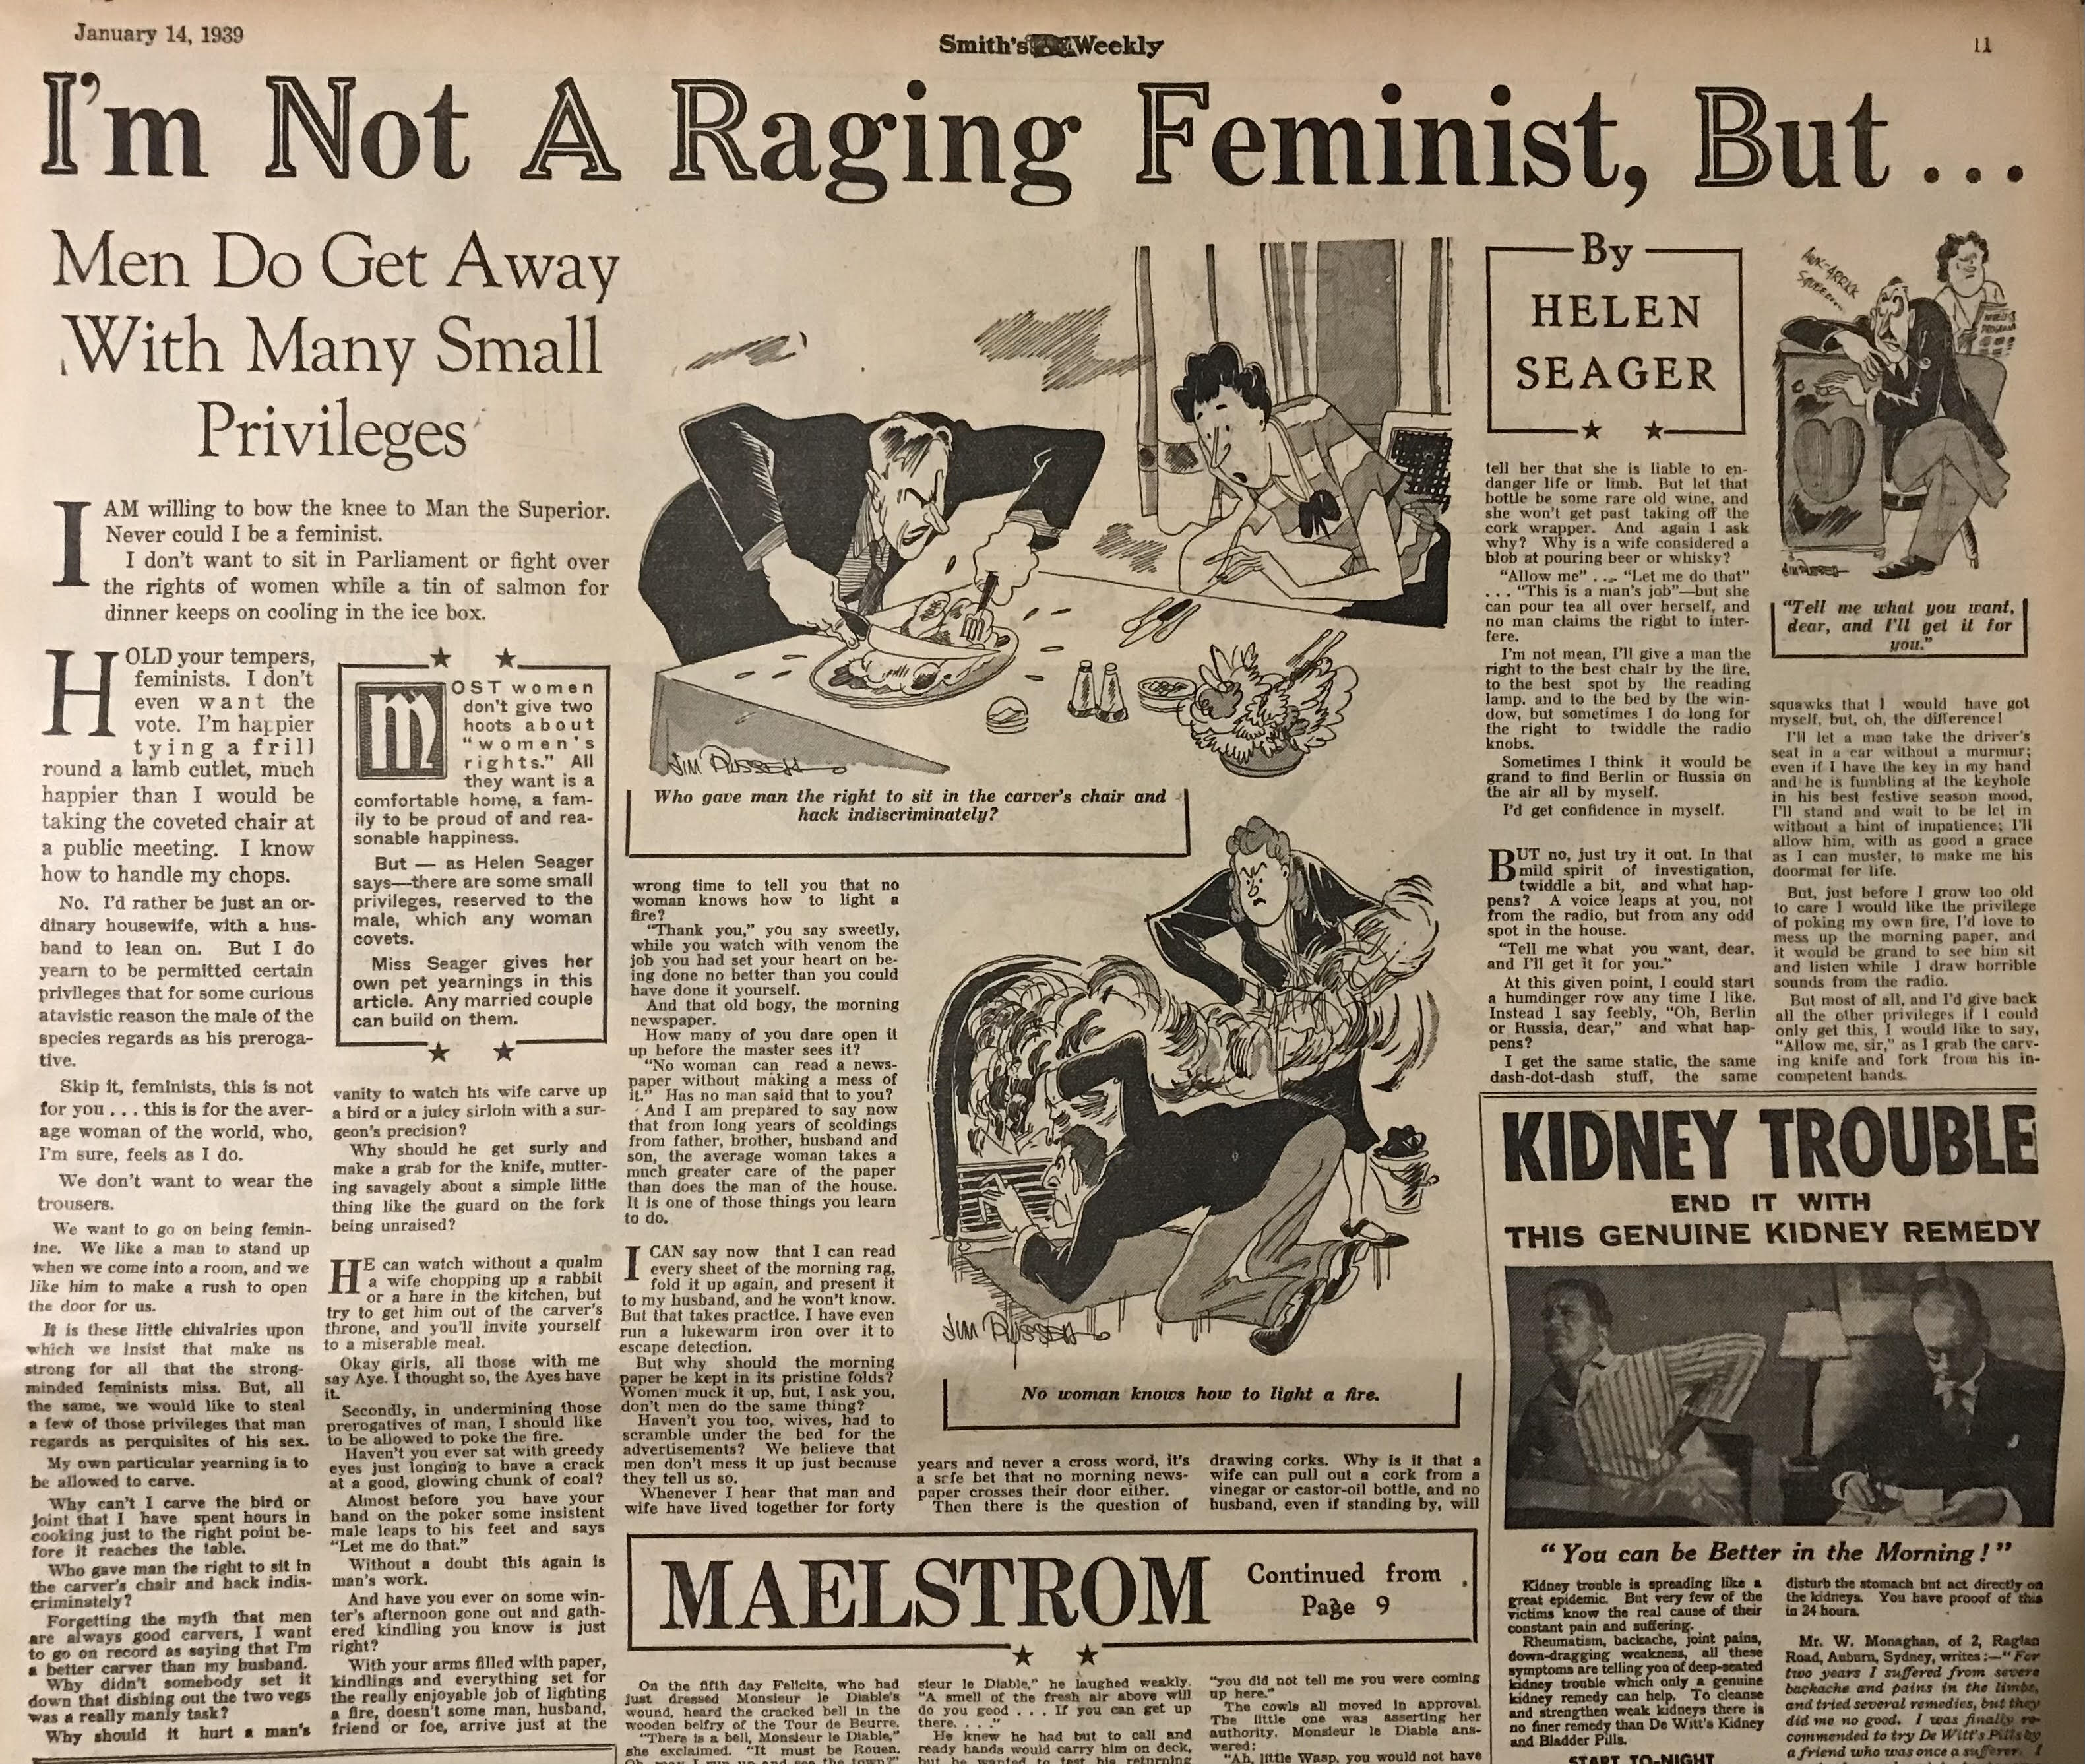 Raging feminist article in Smith's Weekly